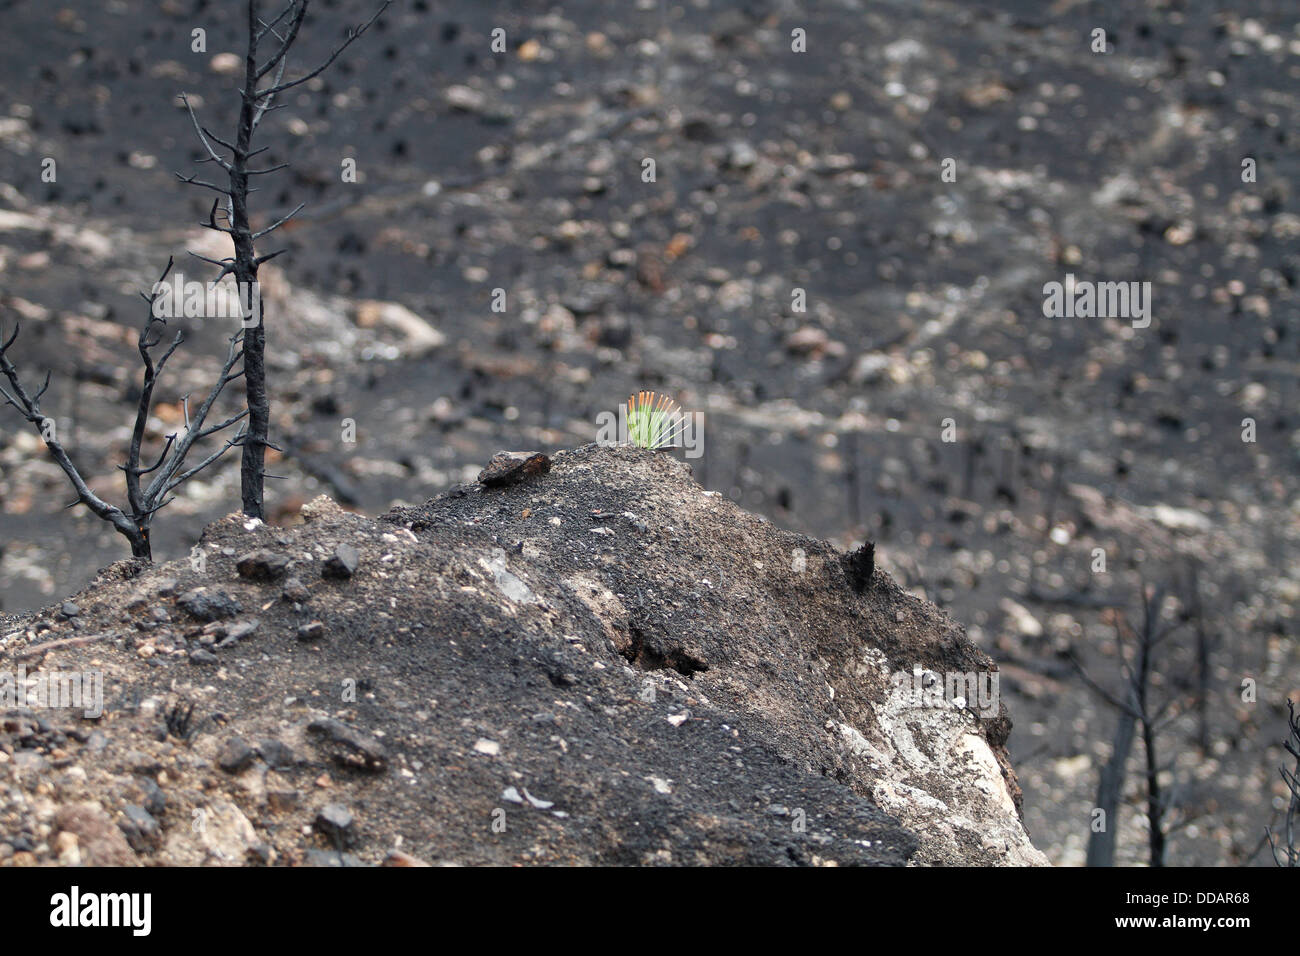 Burned area seen after a wildfire that razed more than 2300 hectares in the Spanish island of Mallorca. Stock Photo